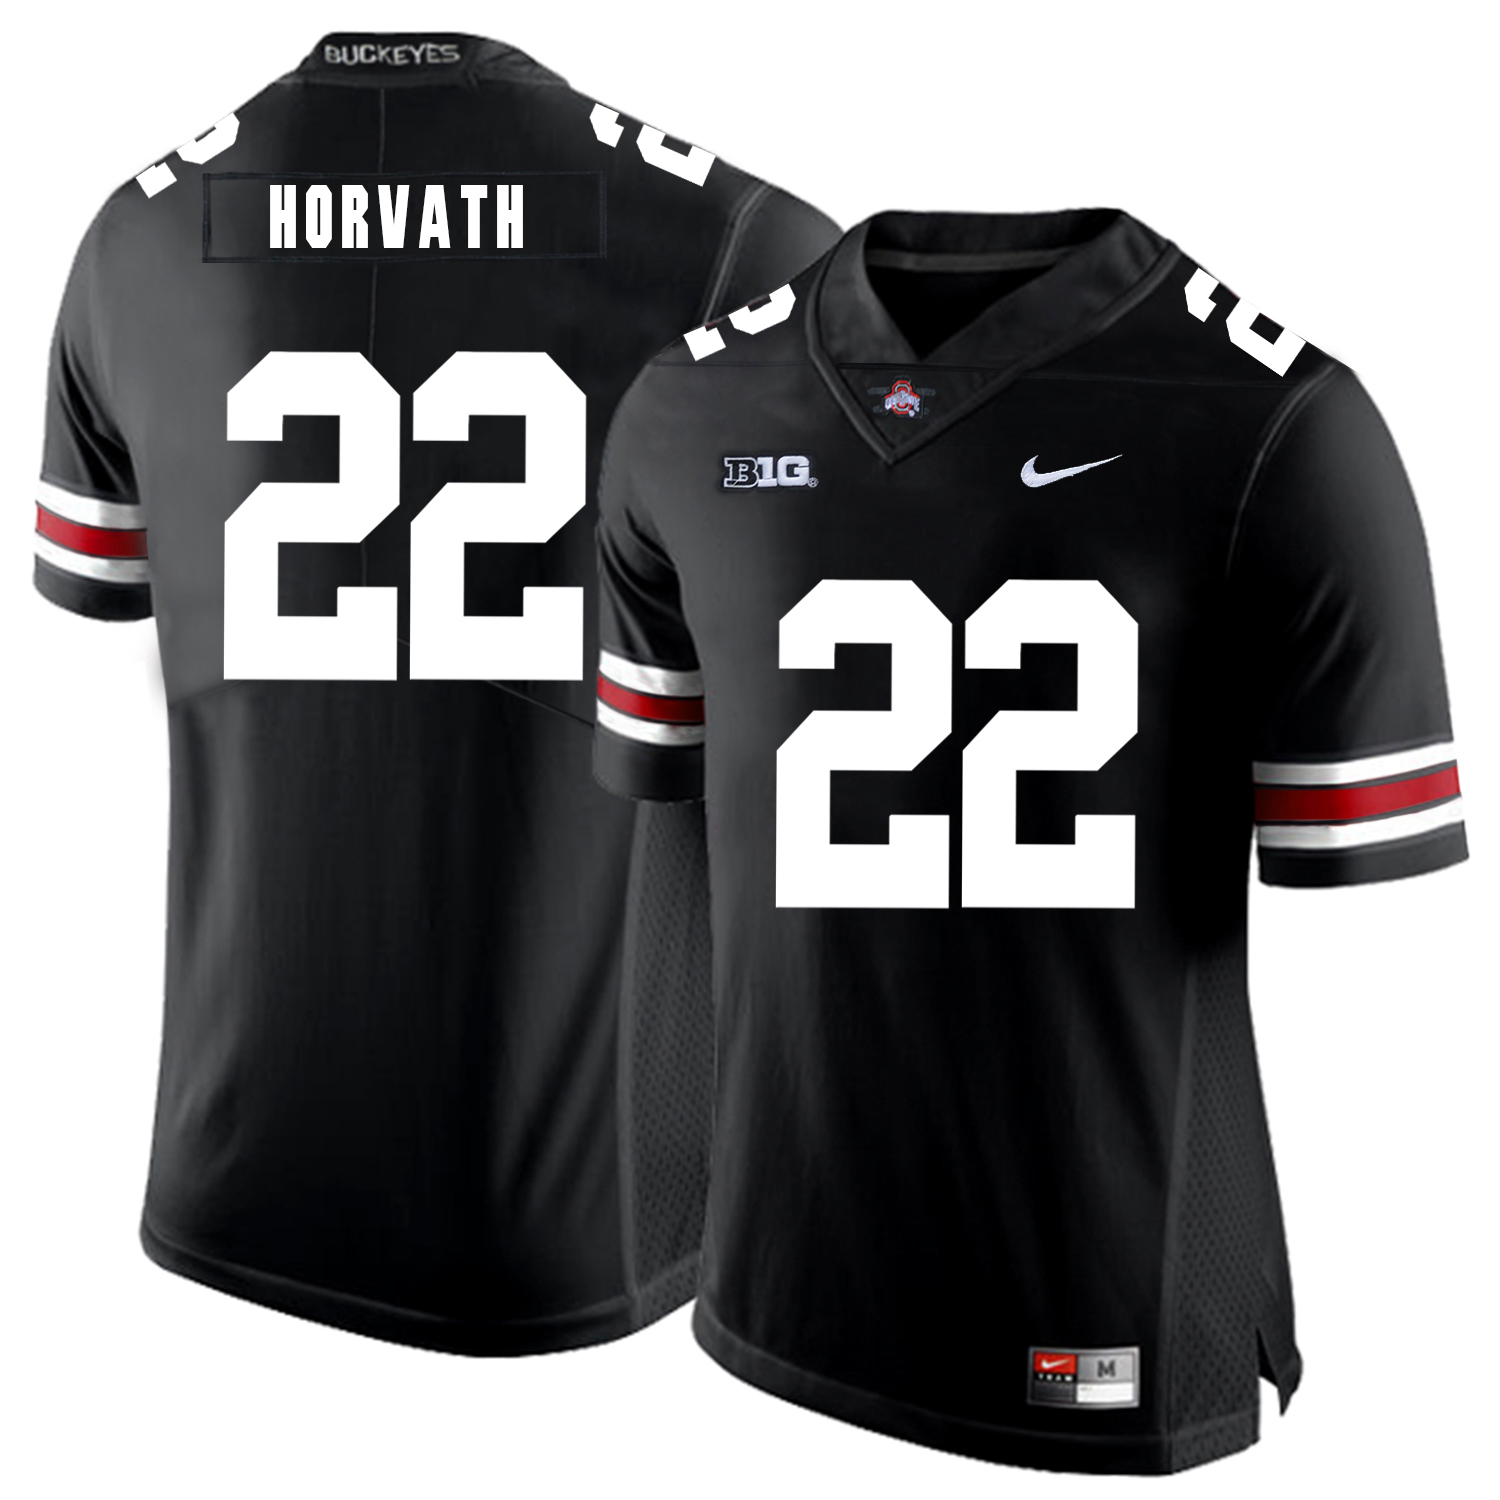 Ohio State Buckeyes 22 Les Horvath Black Nike College Football Jersey